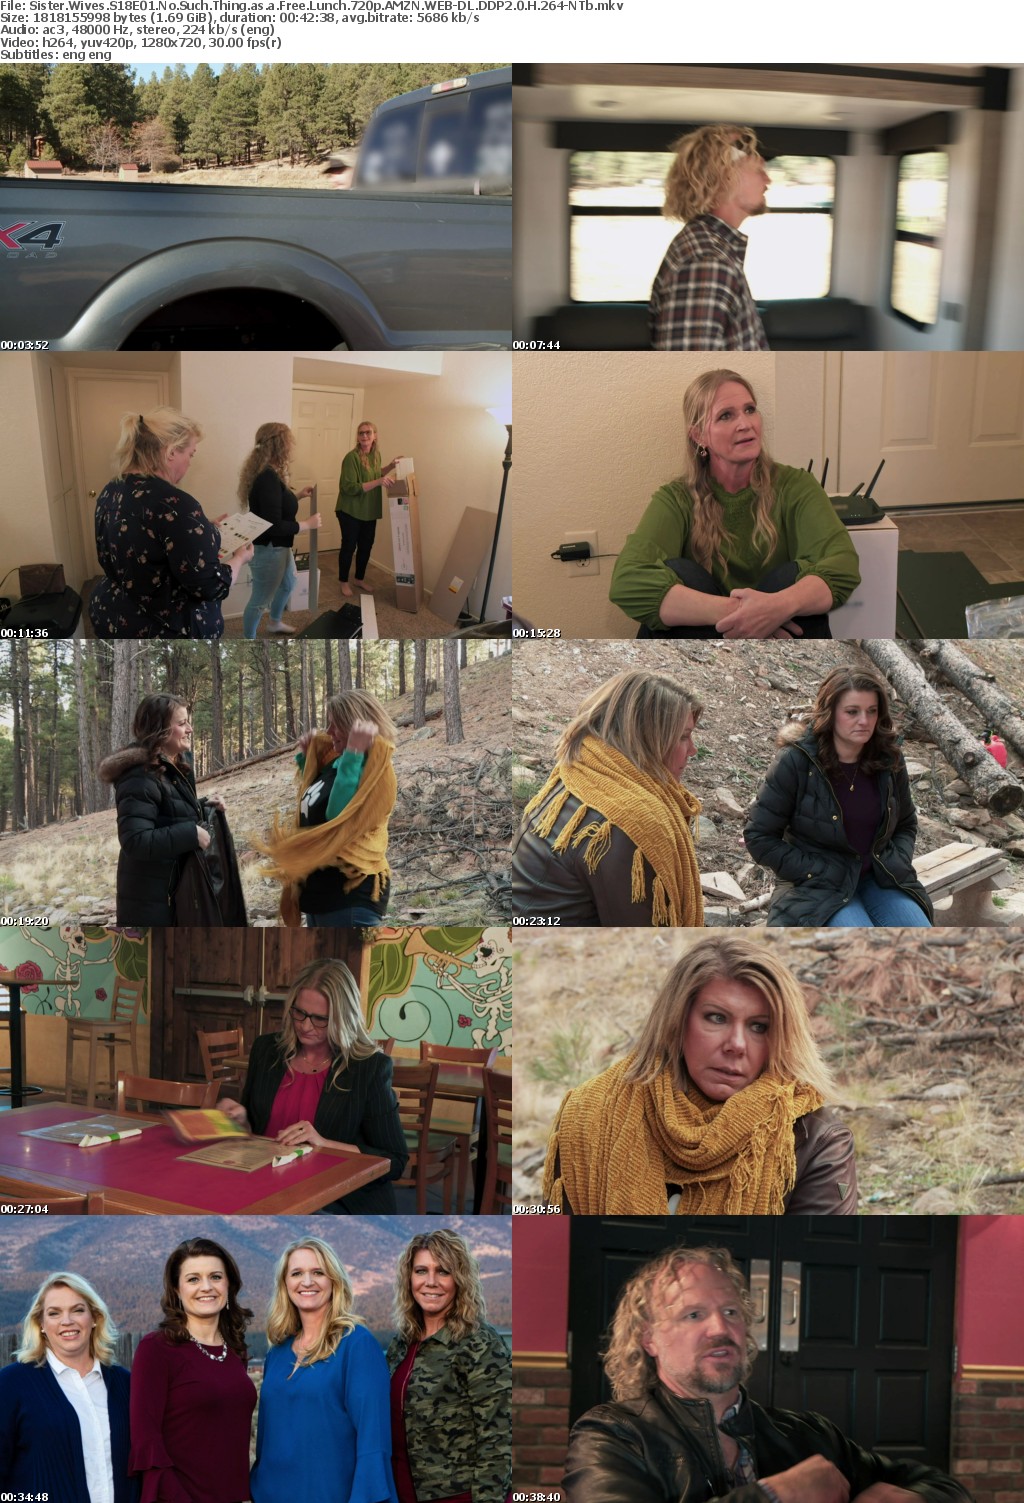 Sister Wives S18E01 No Such Thing as a Free Lunch 720p AMZN WEB-DL DDP2 0 H 264-NTb